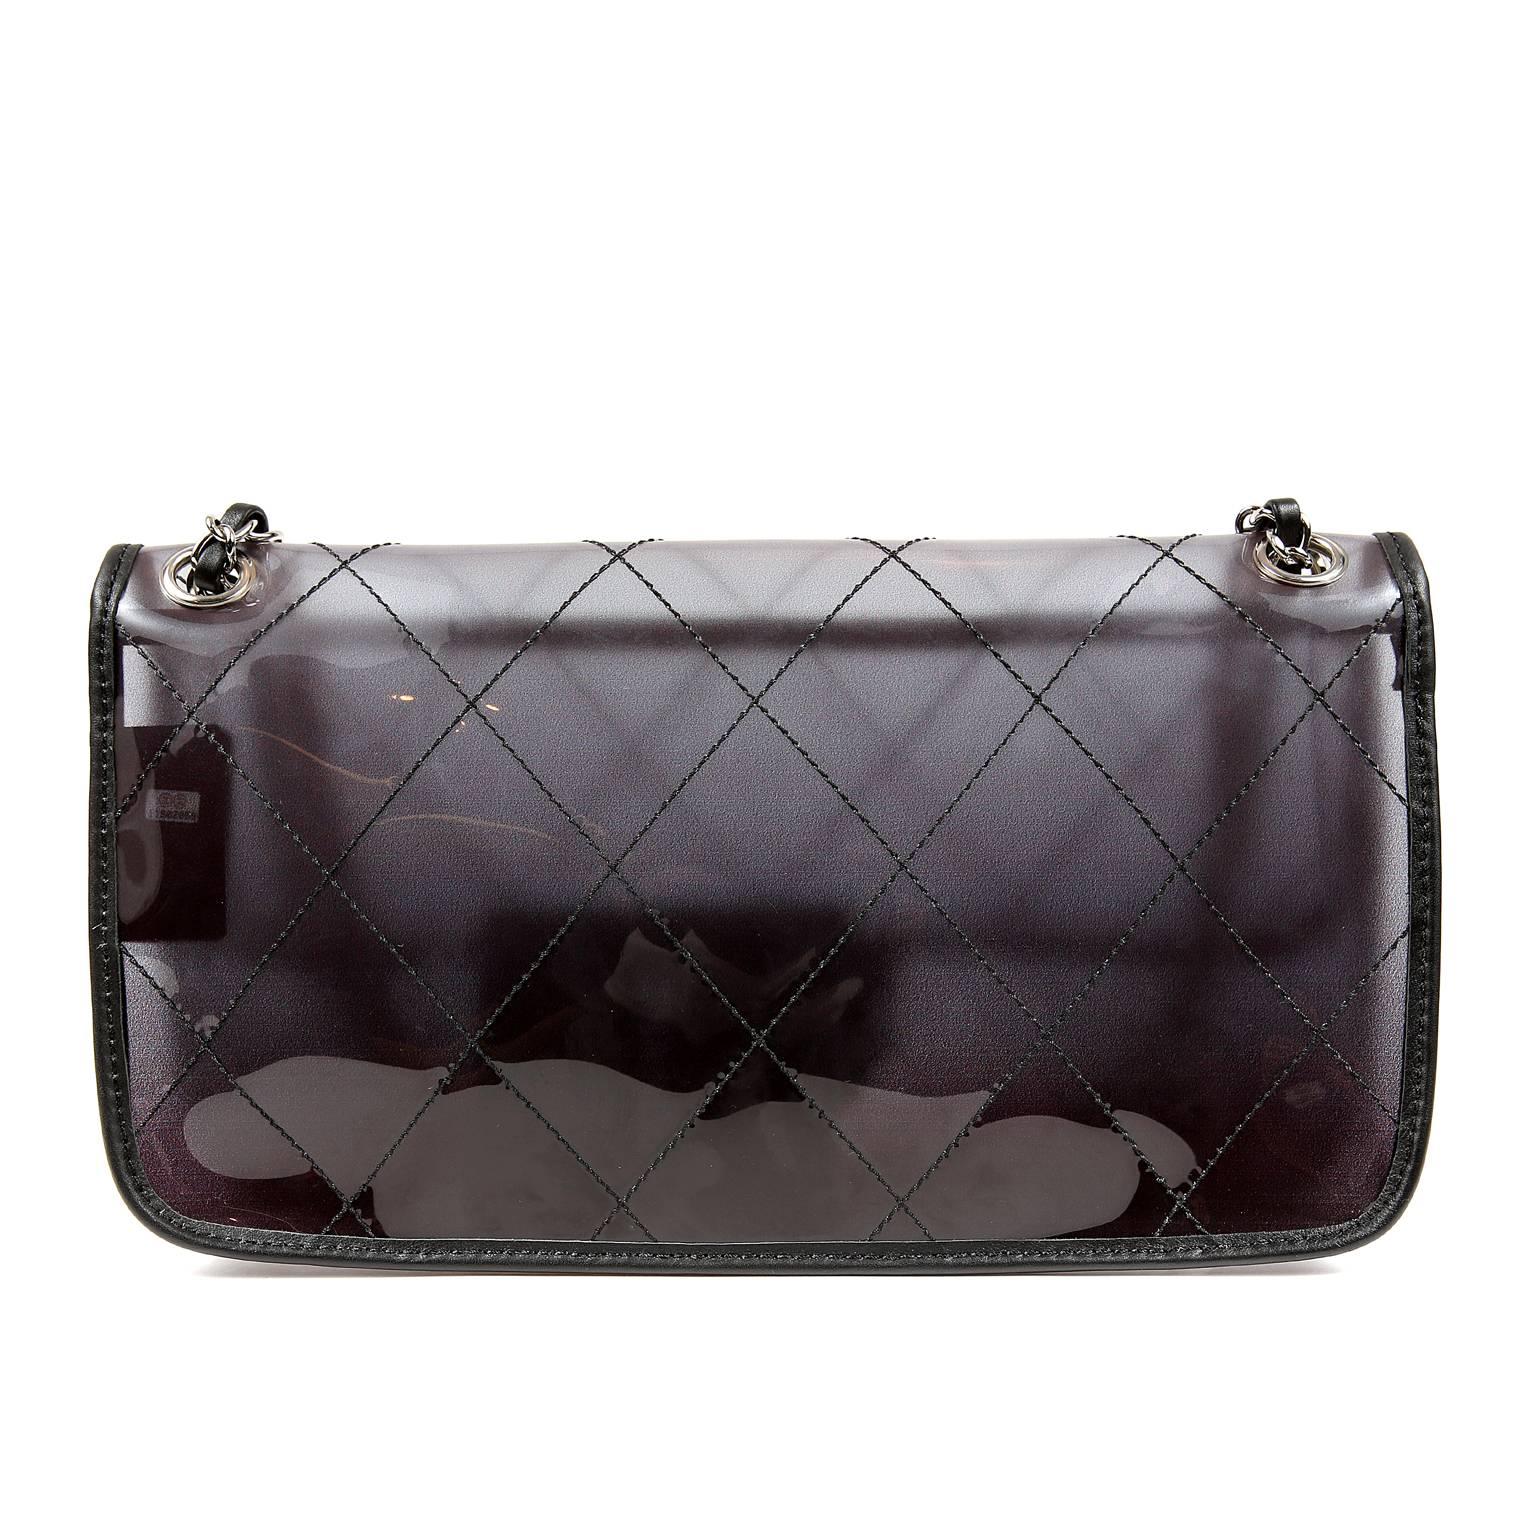 Chanel Naked Flap Bag- PRISTINE
  A sporty runway style, the Naked Flap Bag is a must have for collectors. 

Smoked PVC flap bag is stitched in signature Chanel diamond pattern. Black leather trimmings and silver hardware accents.  Interlocking CC